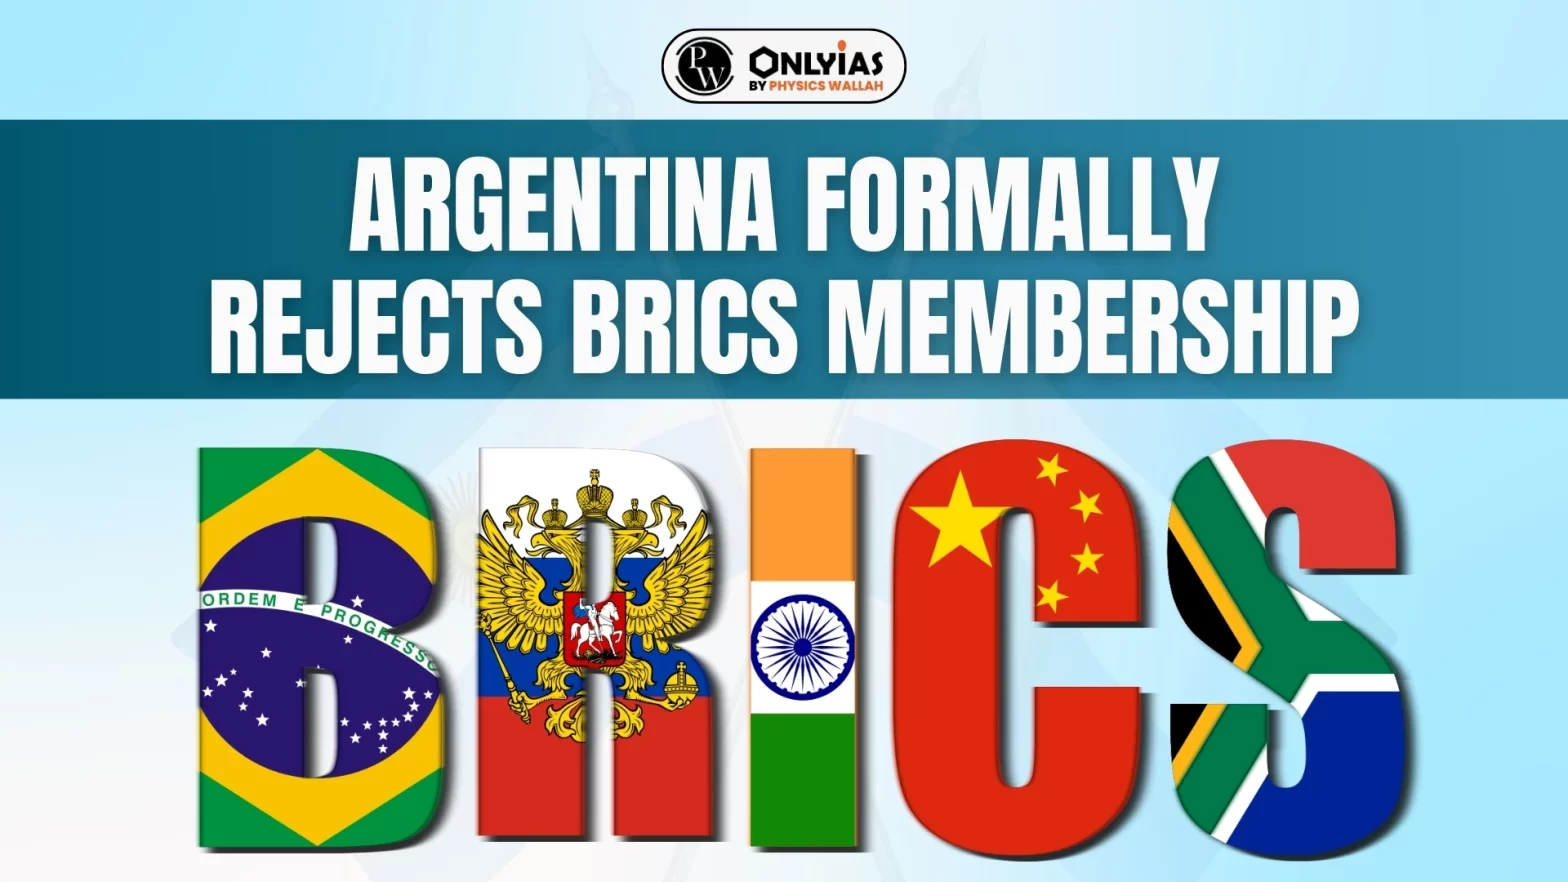 Argentina Formally Rejects BRICS Membership: Reasons, and Consequences